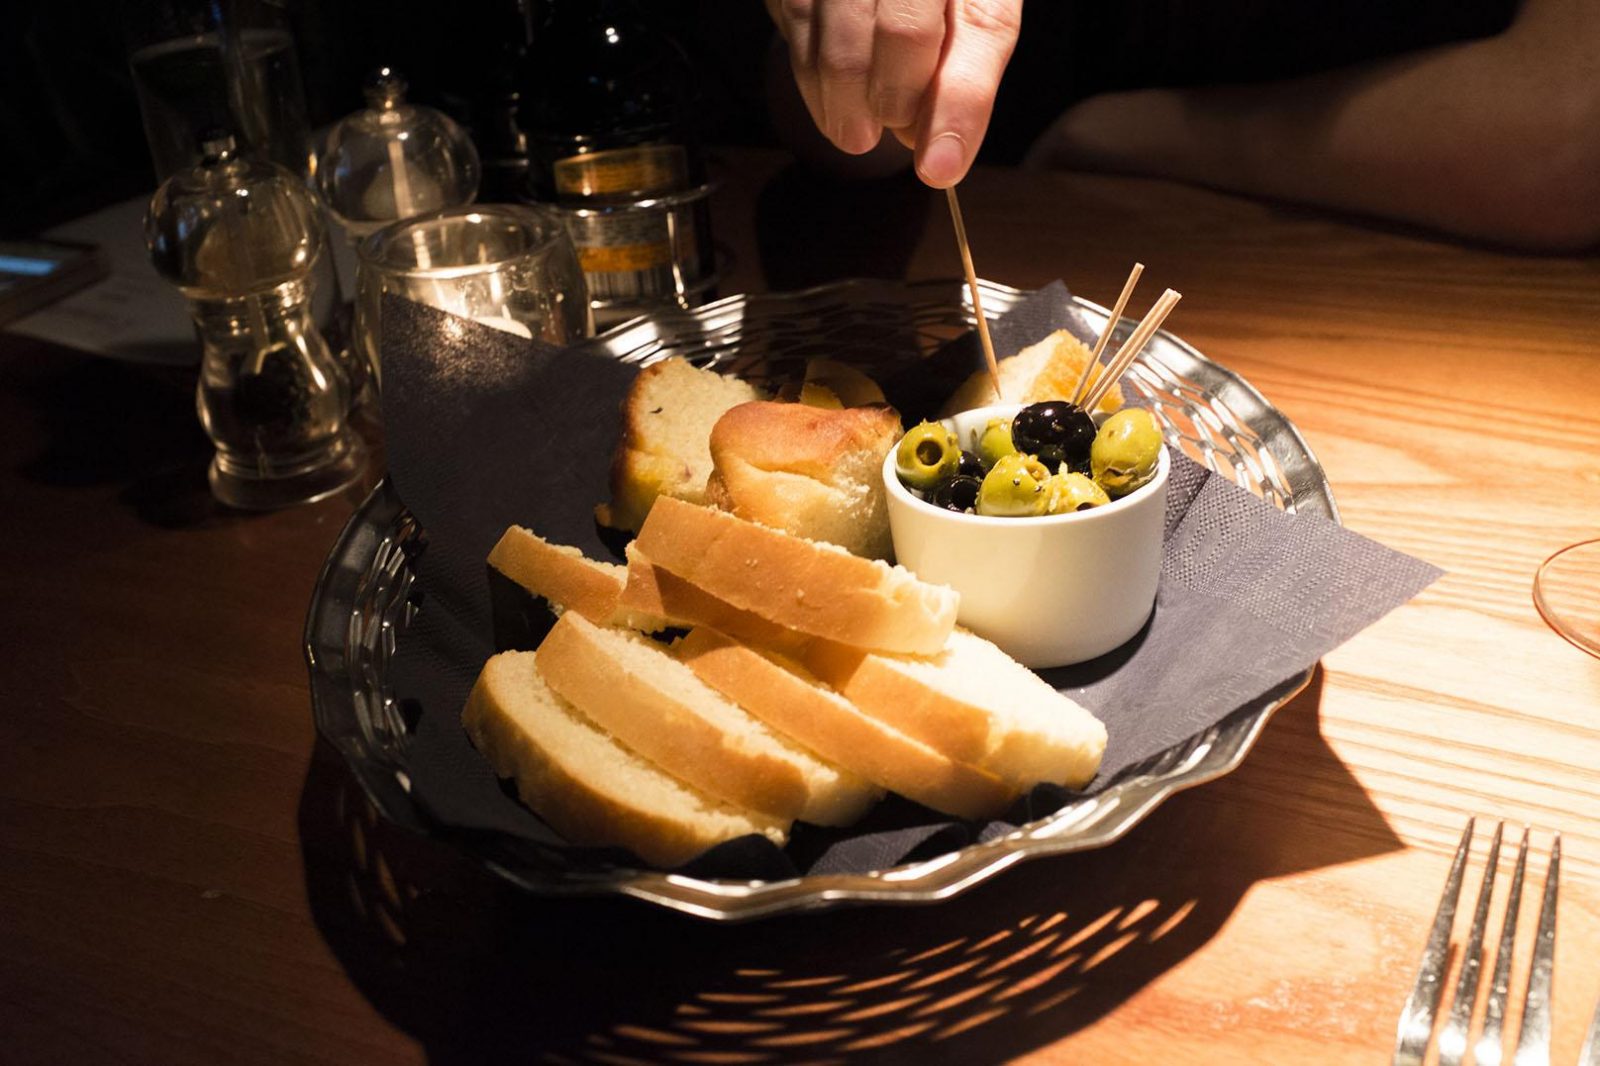 olives and bread in cucina rustica